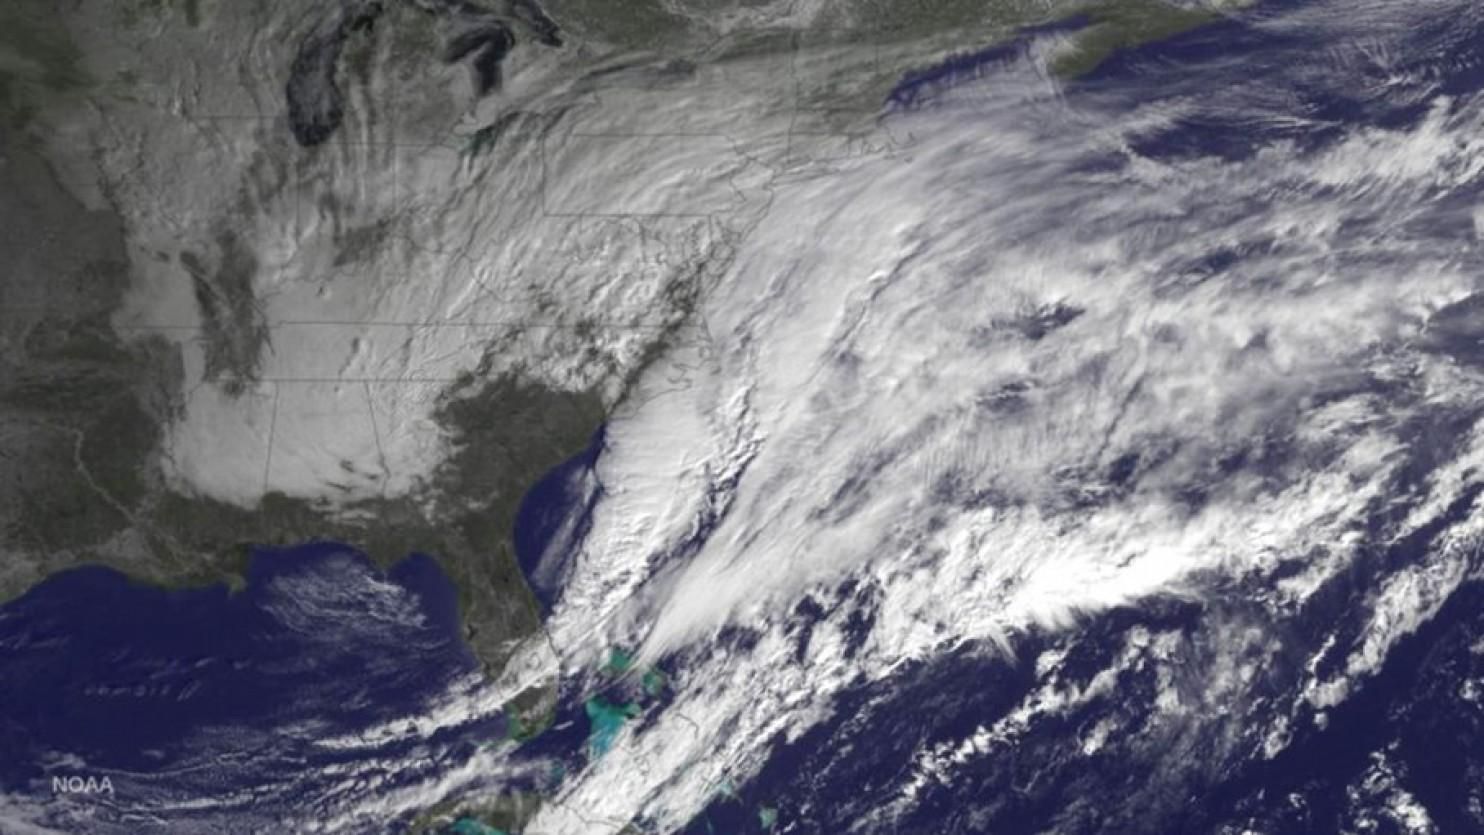 Nor'Easter Juno approaching the eastern United States is seen in a NOAA GOES satellite image released Monday. (Photo: Reuters/NOAA/Handout)